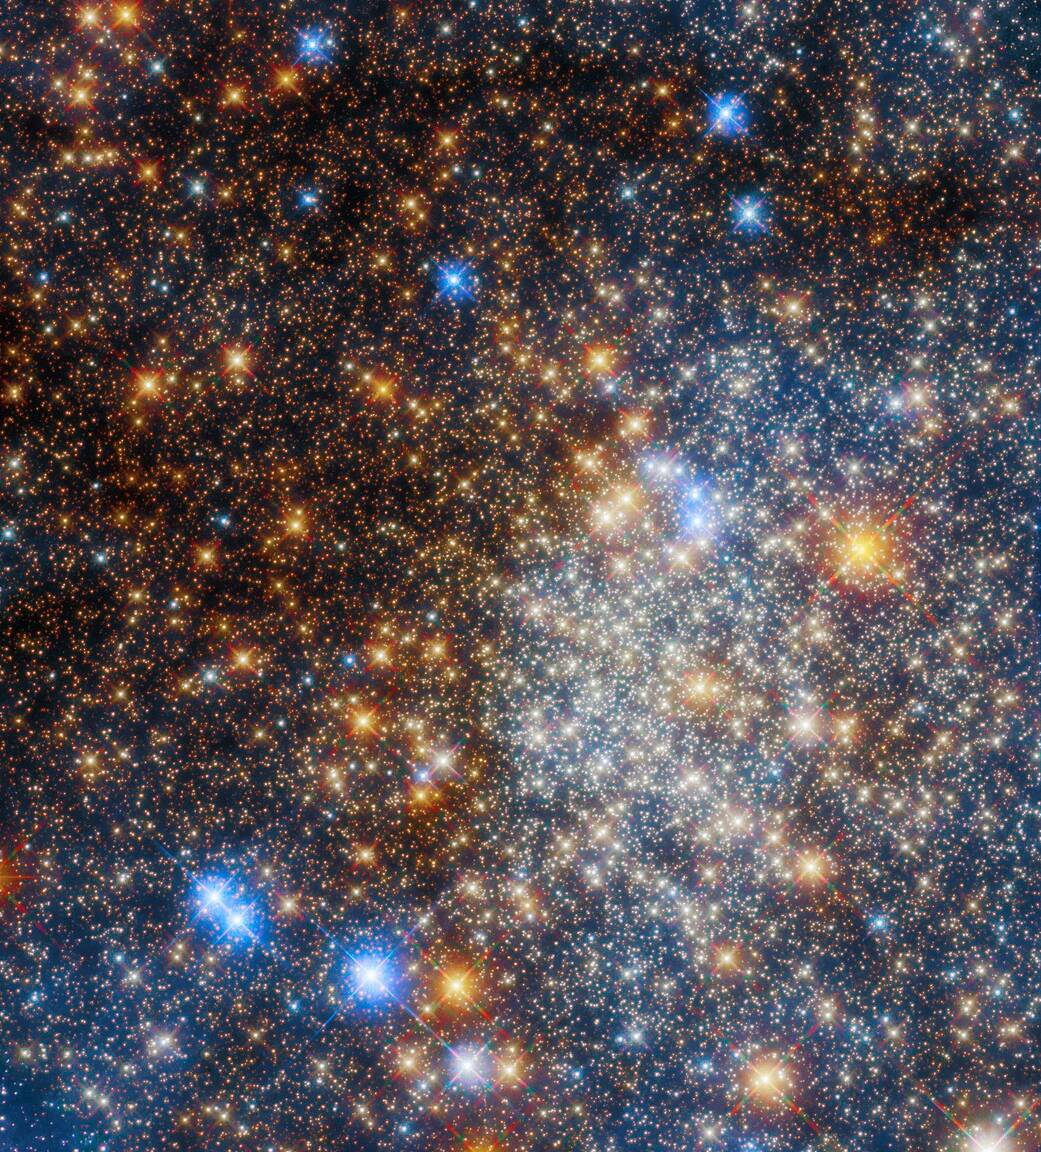 A field of stars in colors of yellow, gold, and blue fills the frame against a black background.